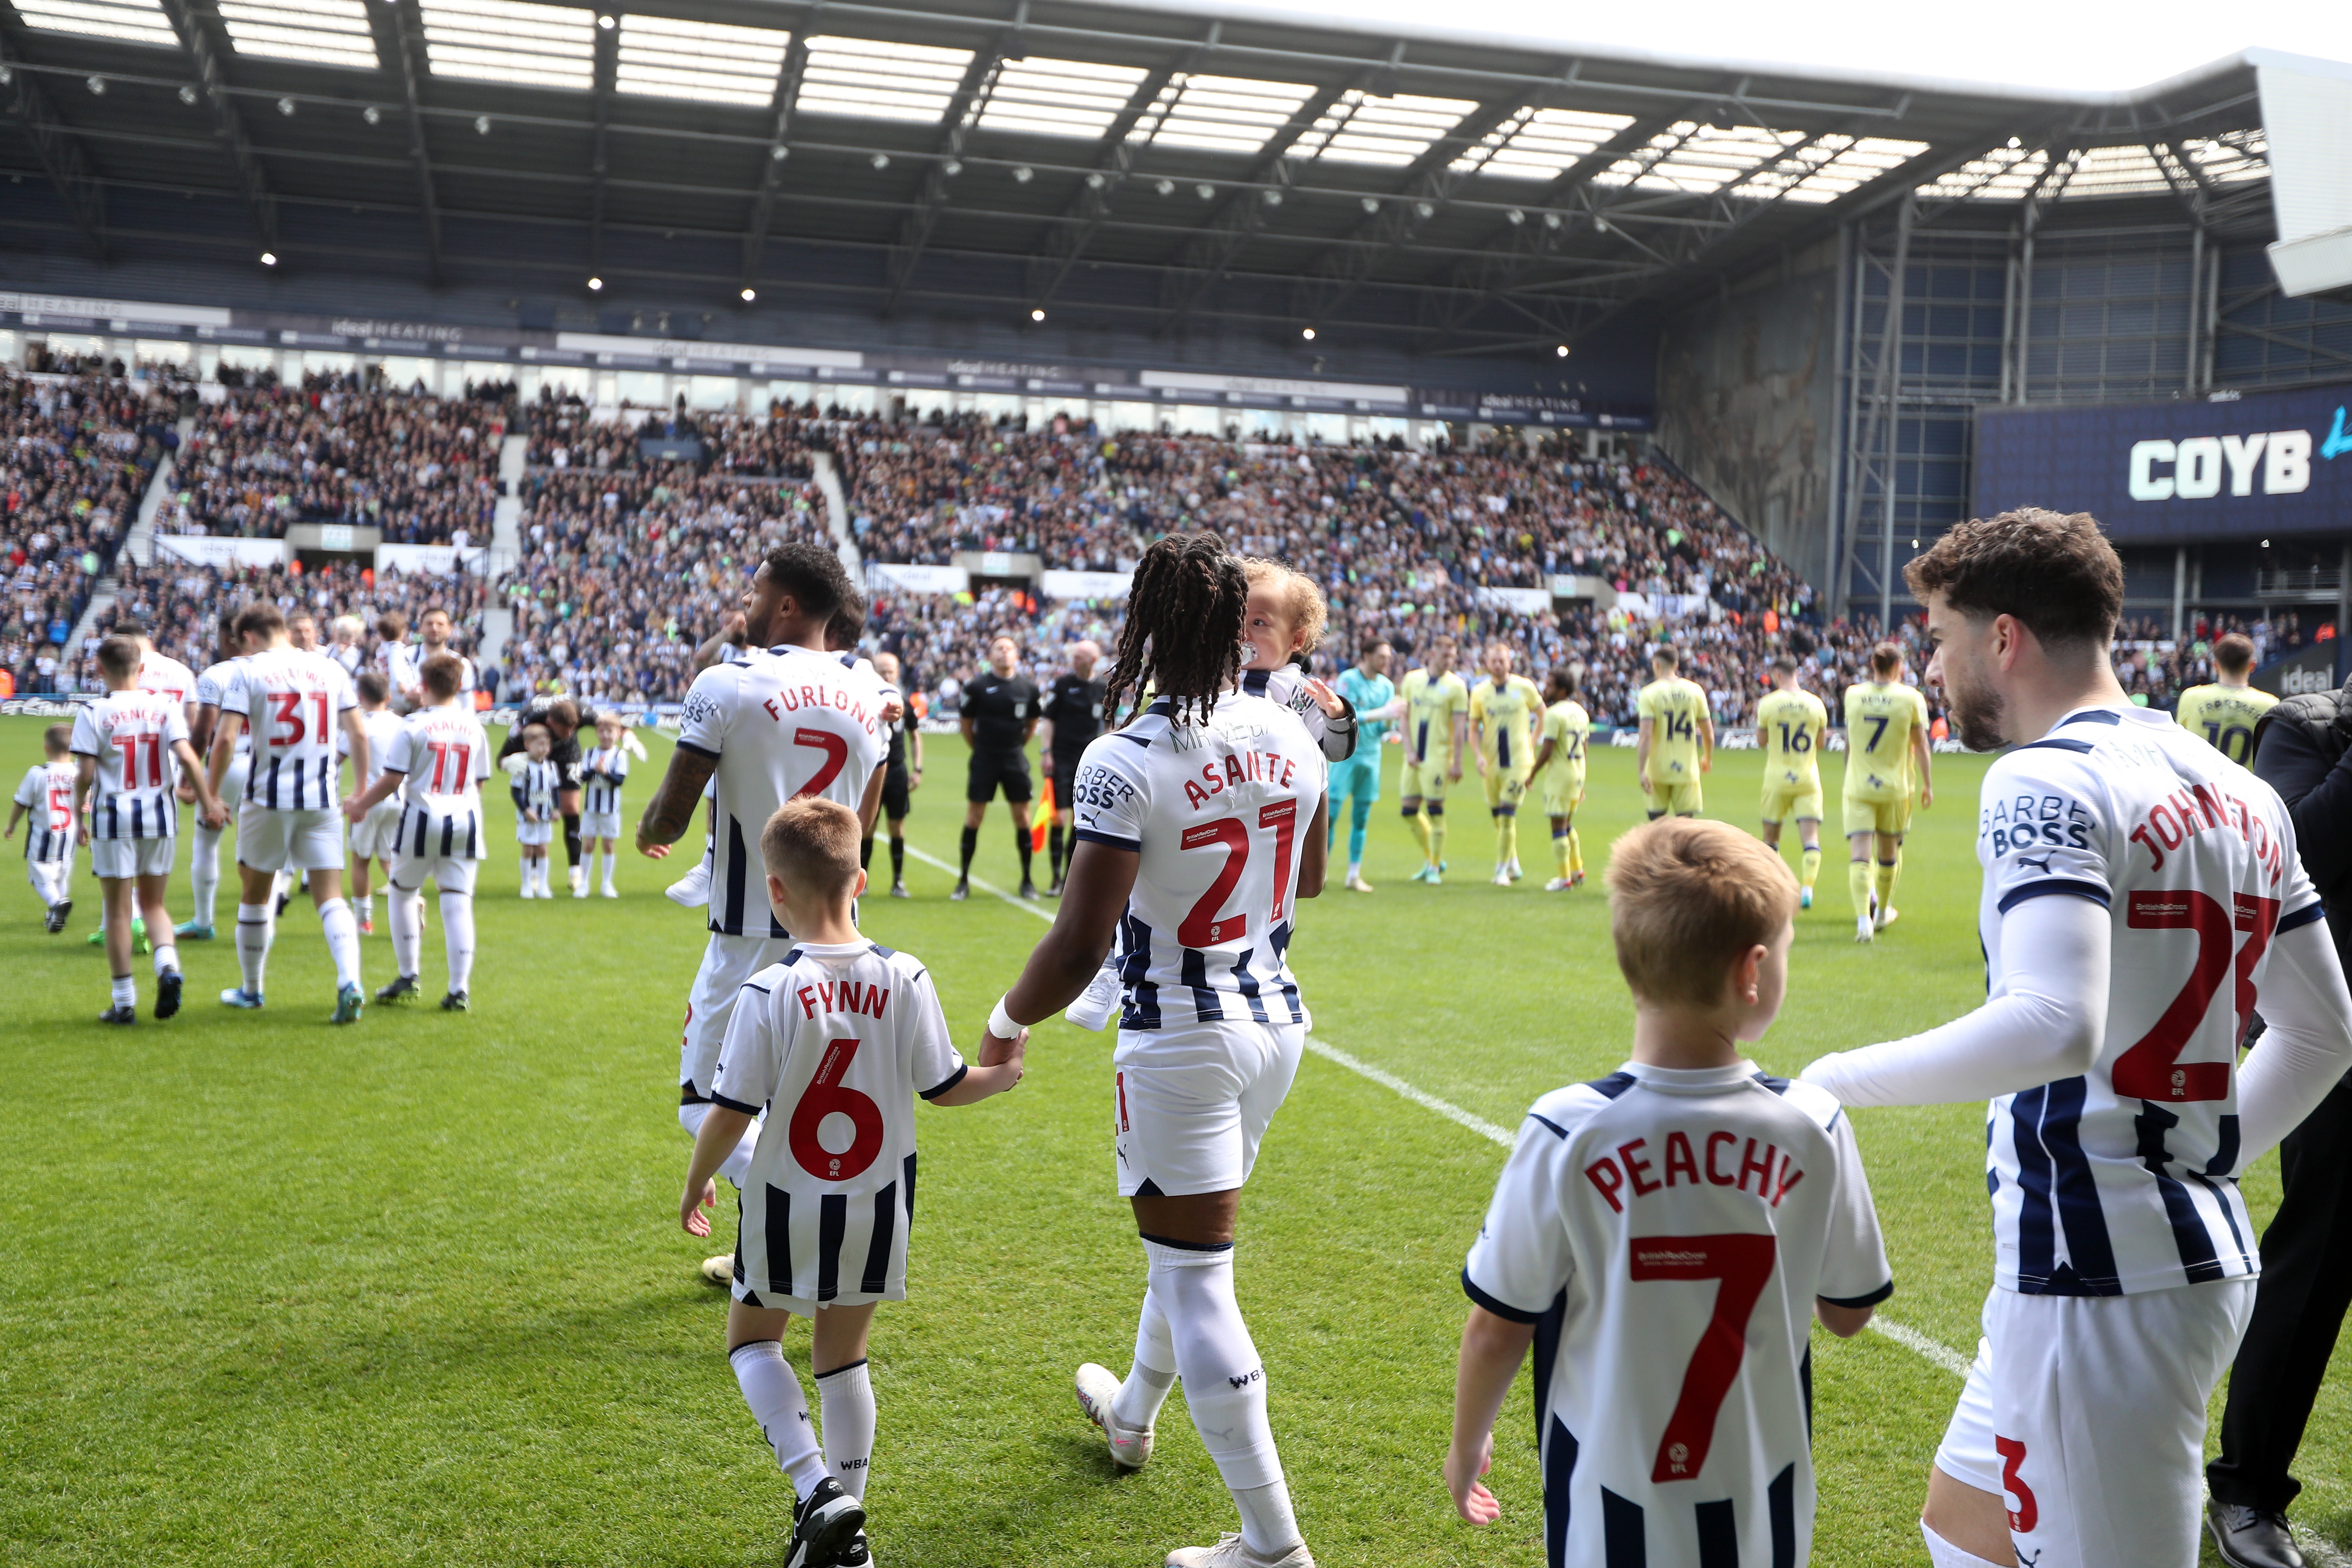 Albion players walking out of the tunnel at The Hawthorns before the Preston game